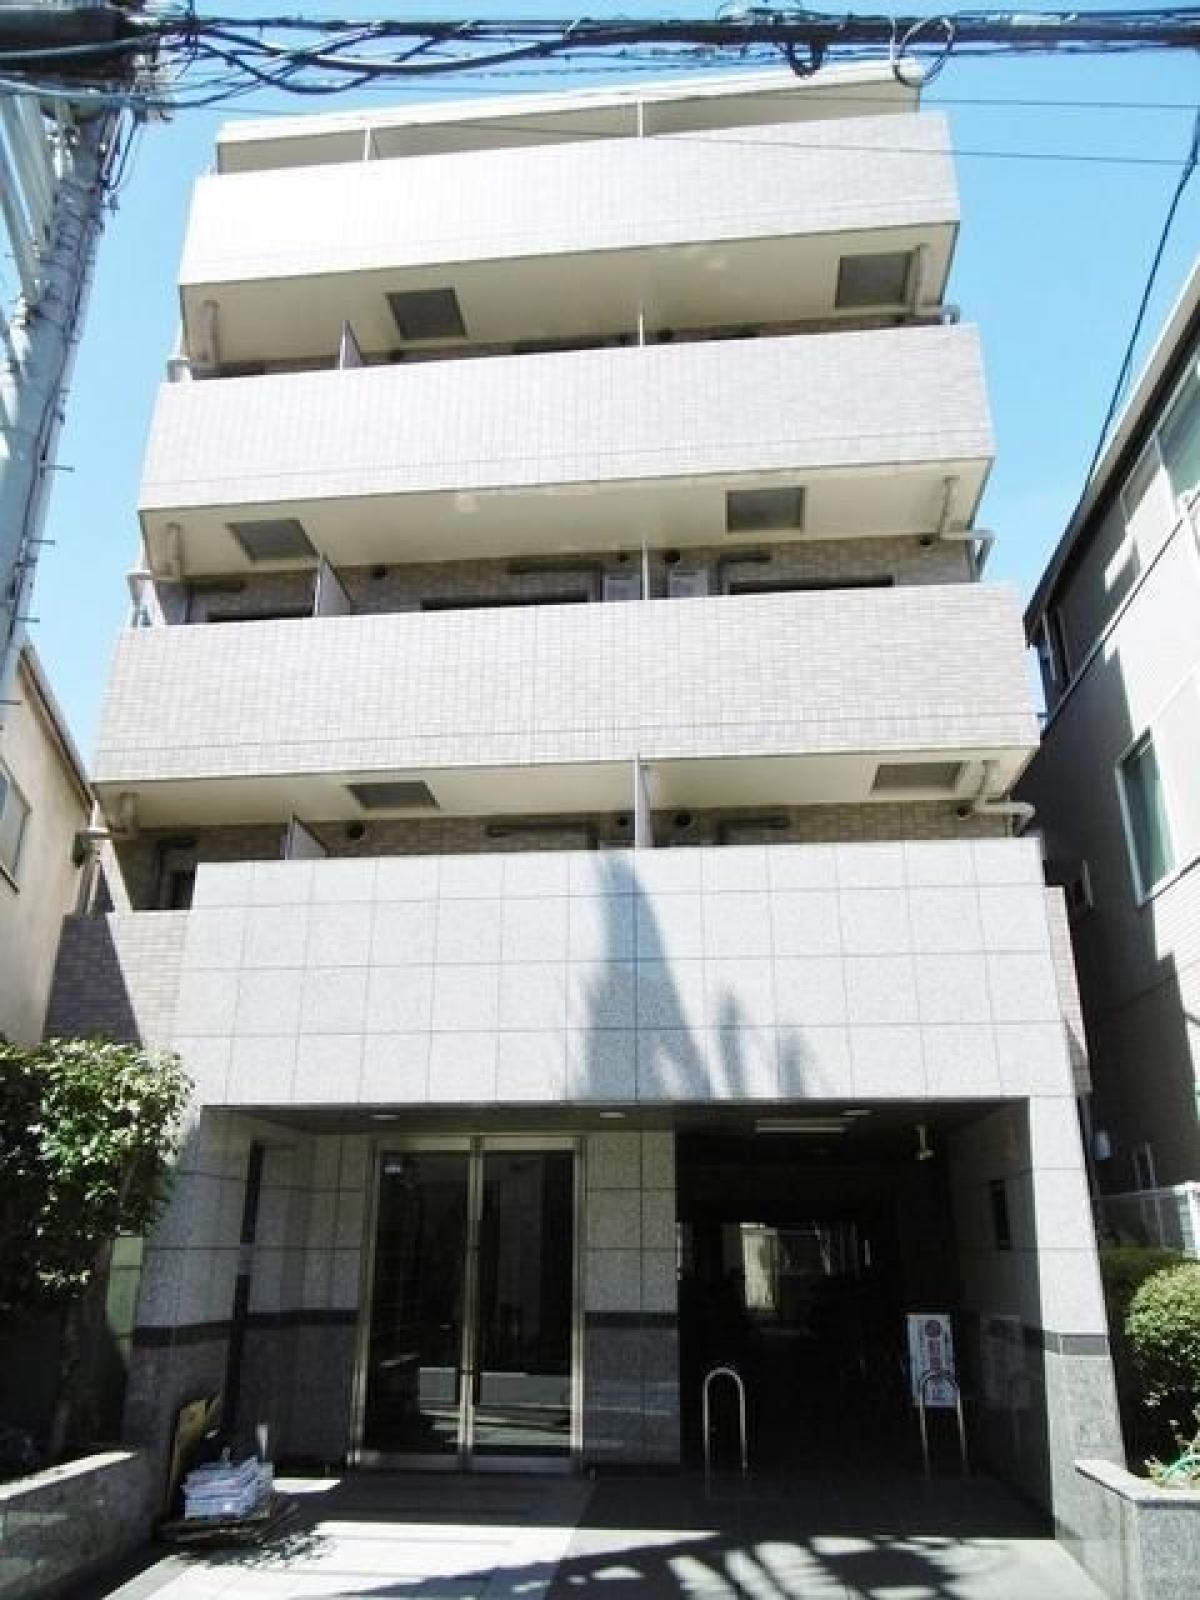 Picture of Apartment For Sale in Meguro Ku, Tokyo, Japan